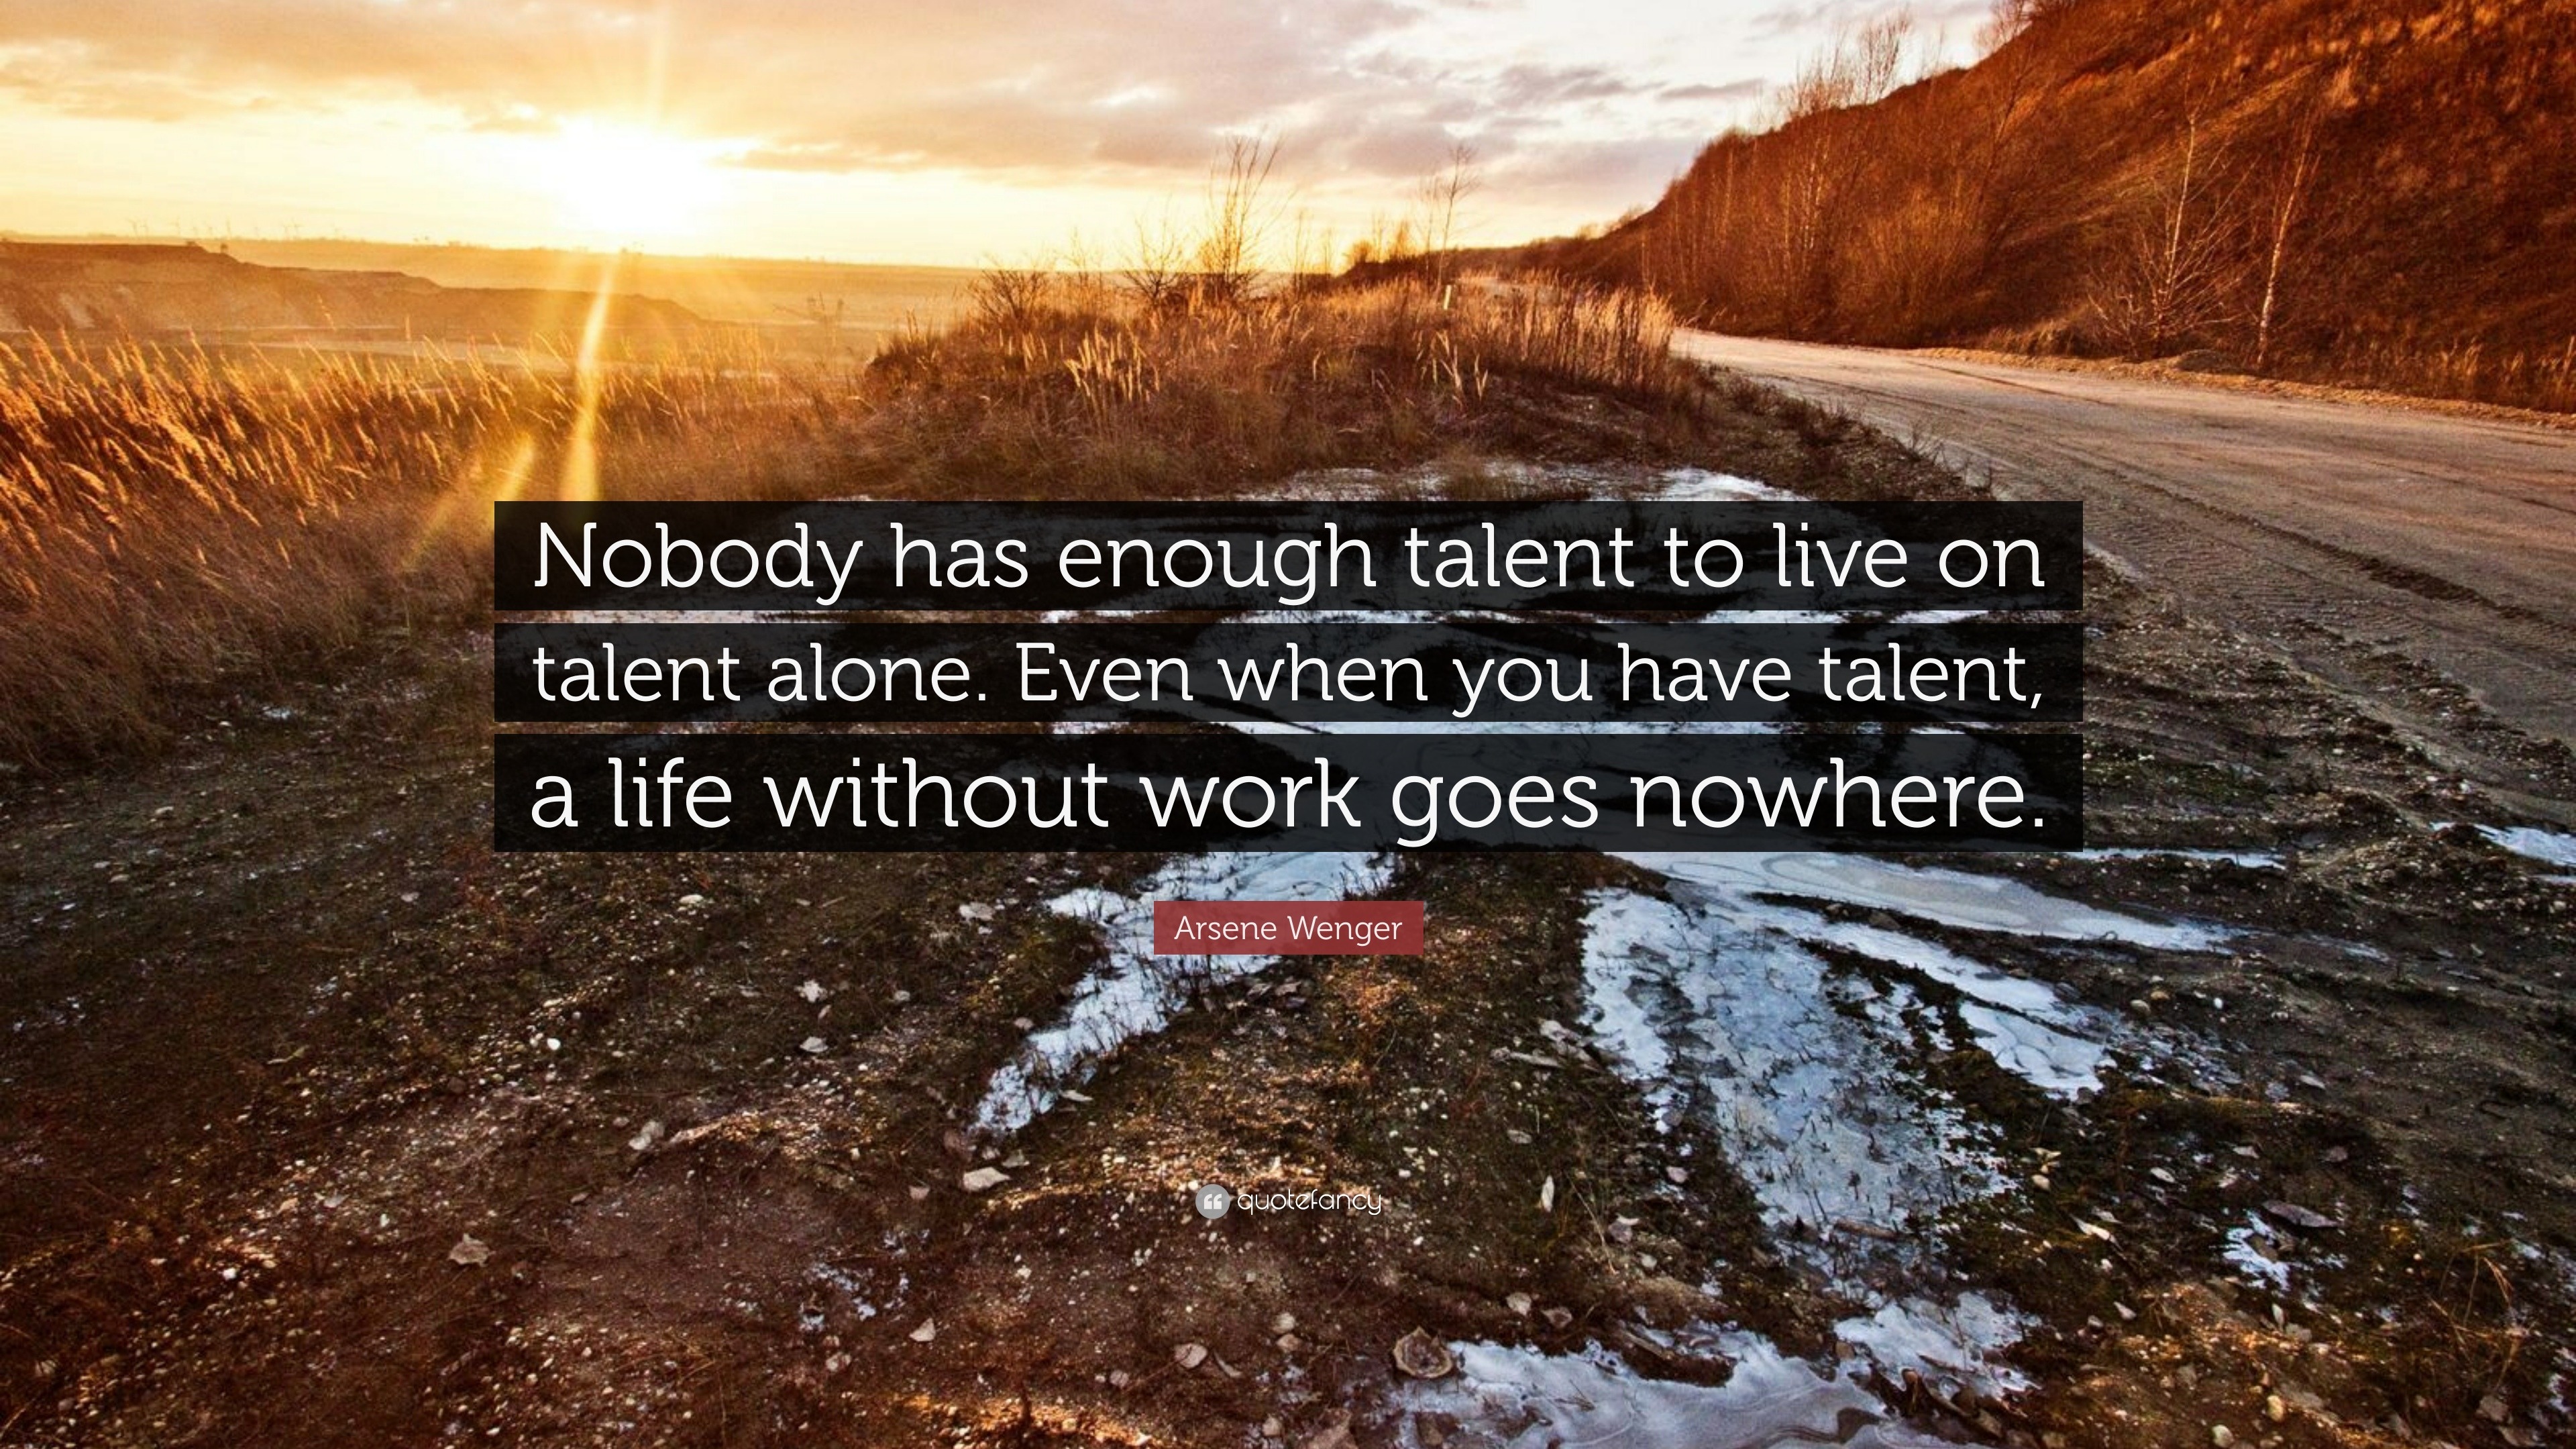 The talent no one has